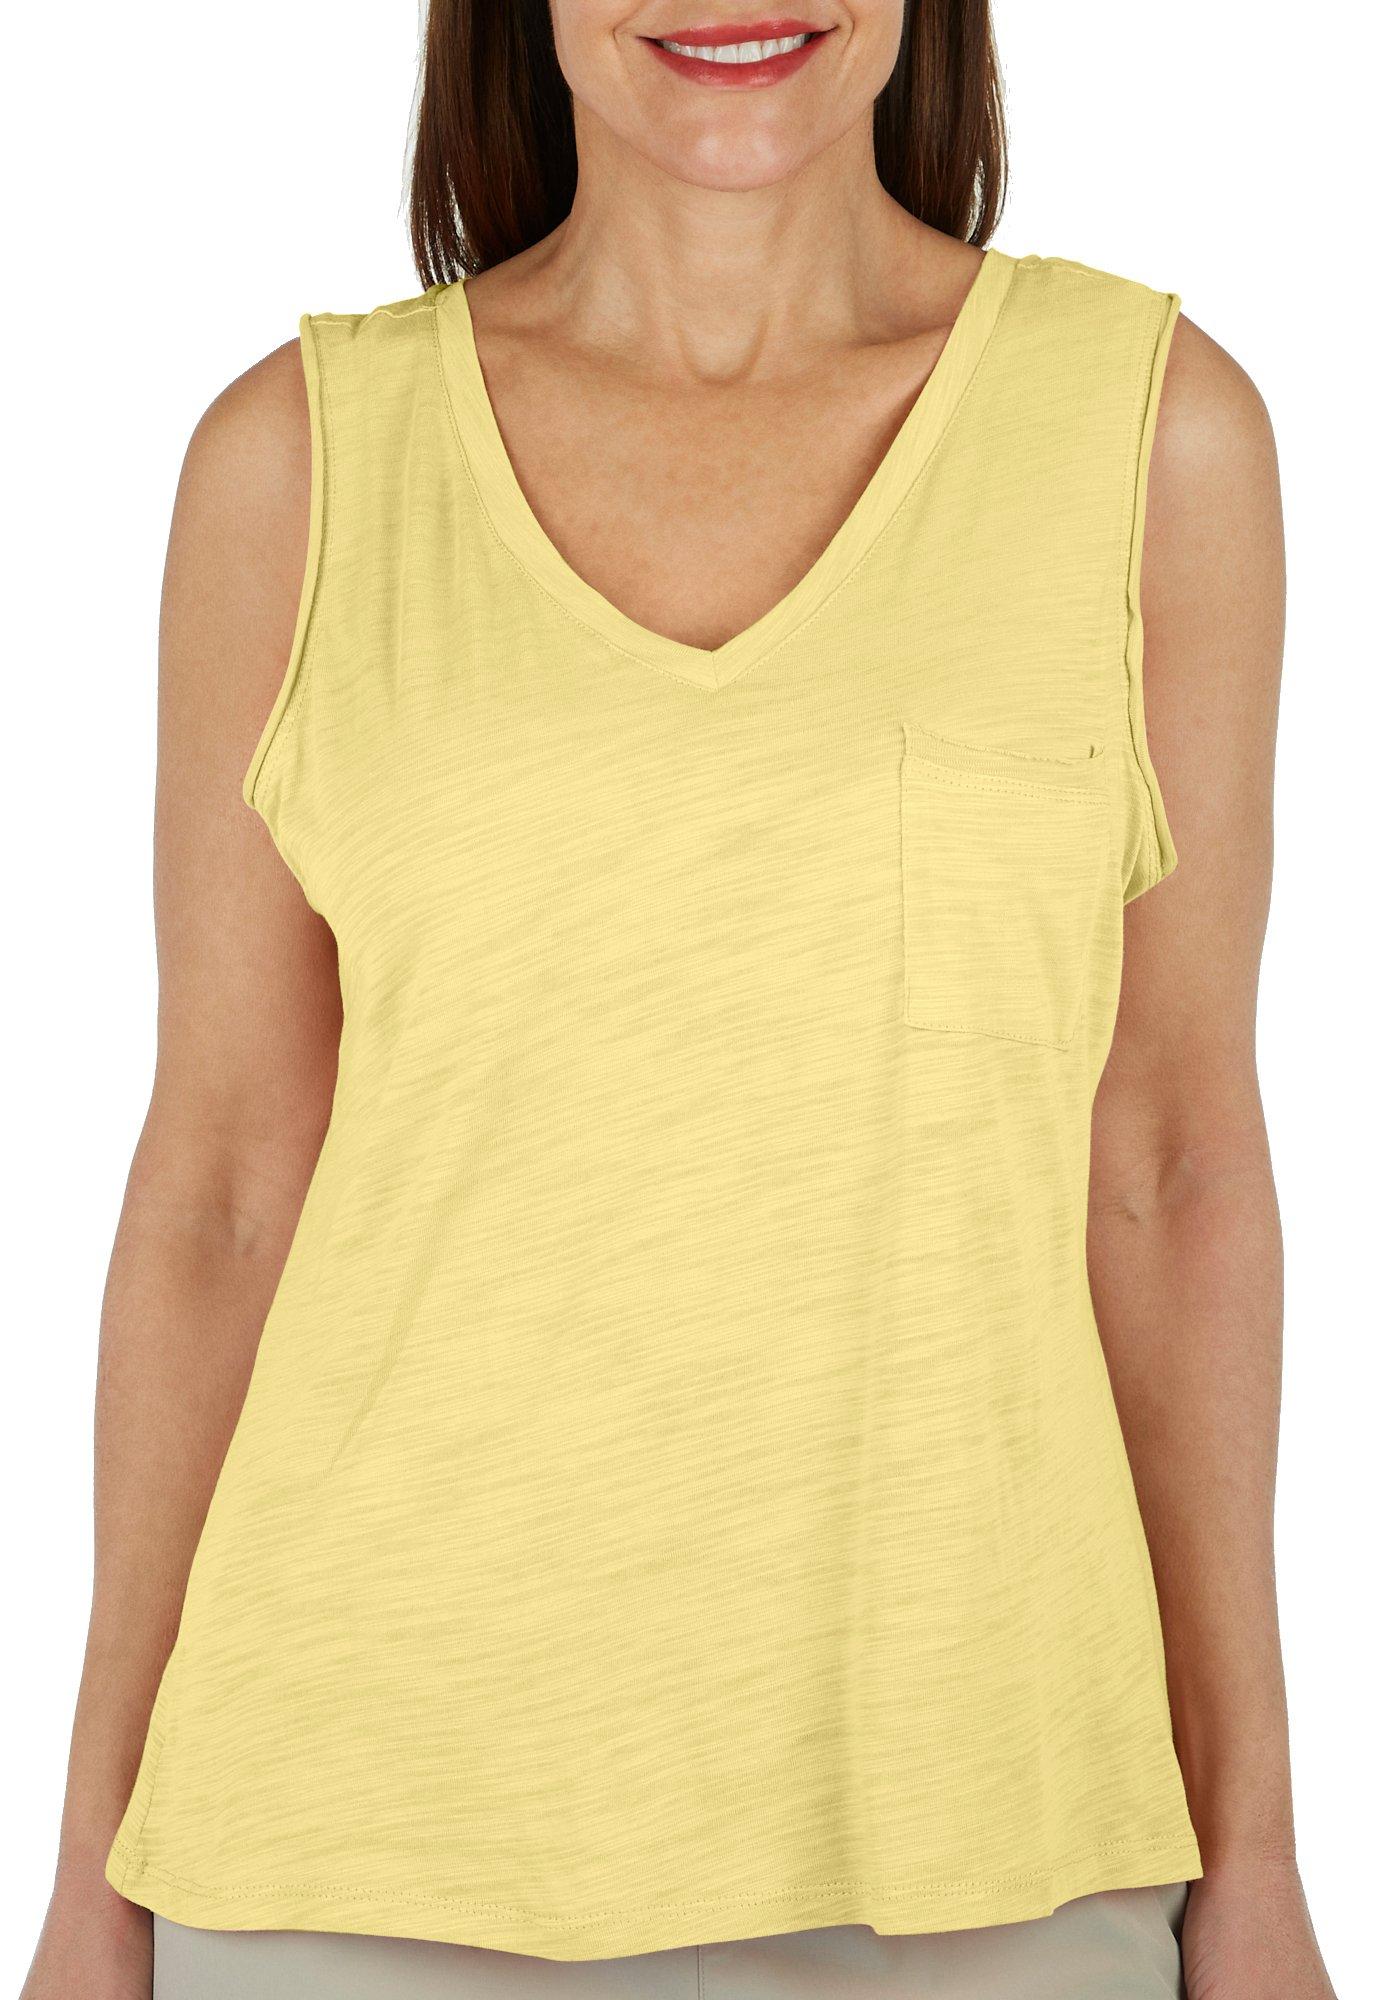 VOGO Athletica, Tops, Neon Yellow Gray Trim Athletic Workout Exercise  Workout Tank Top Vogo Athletica